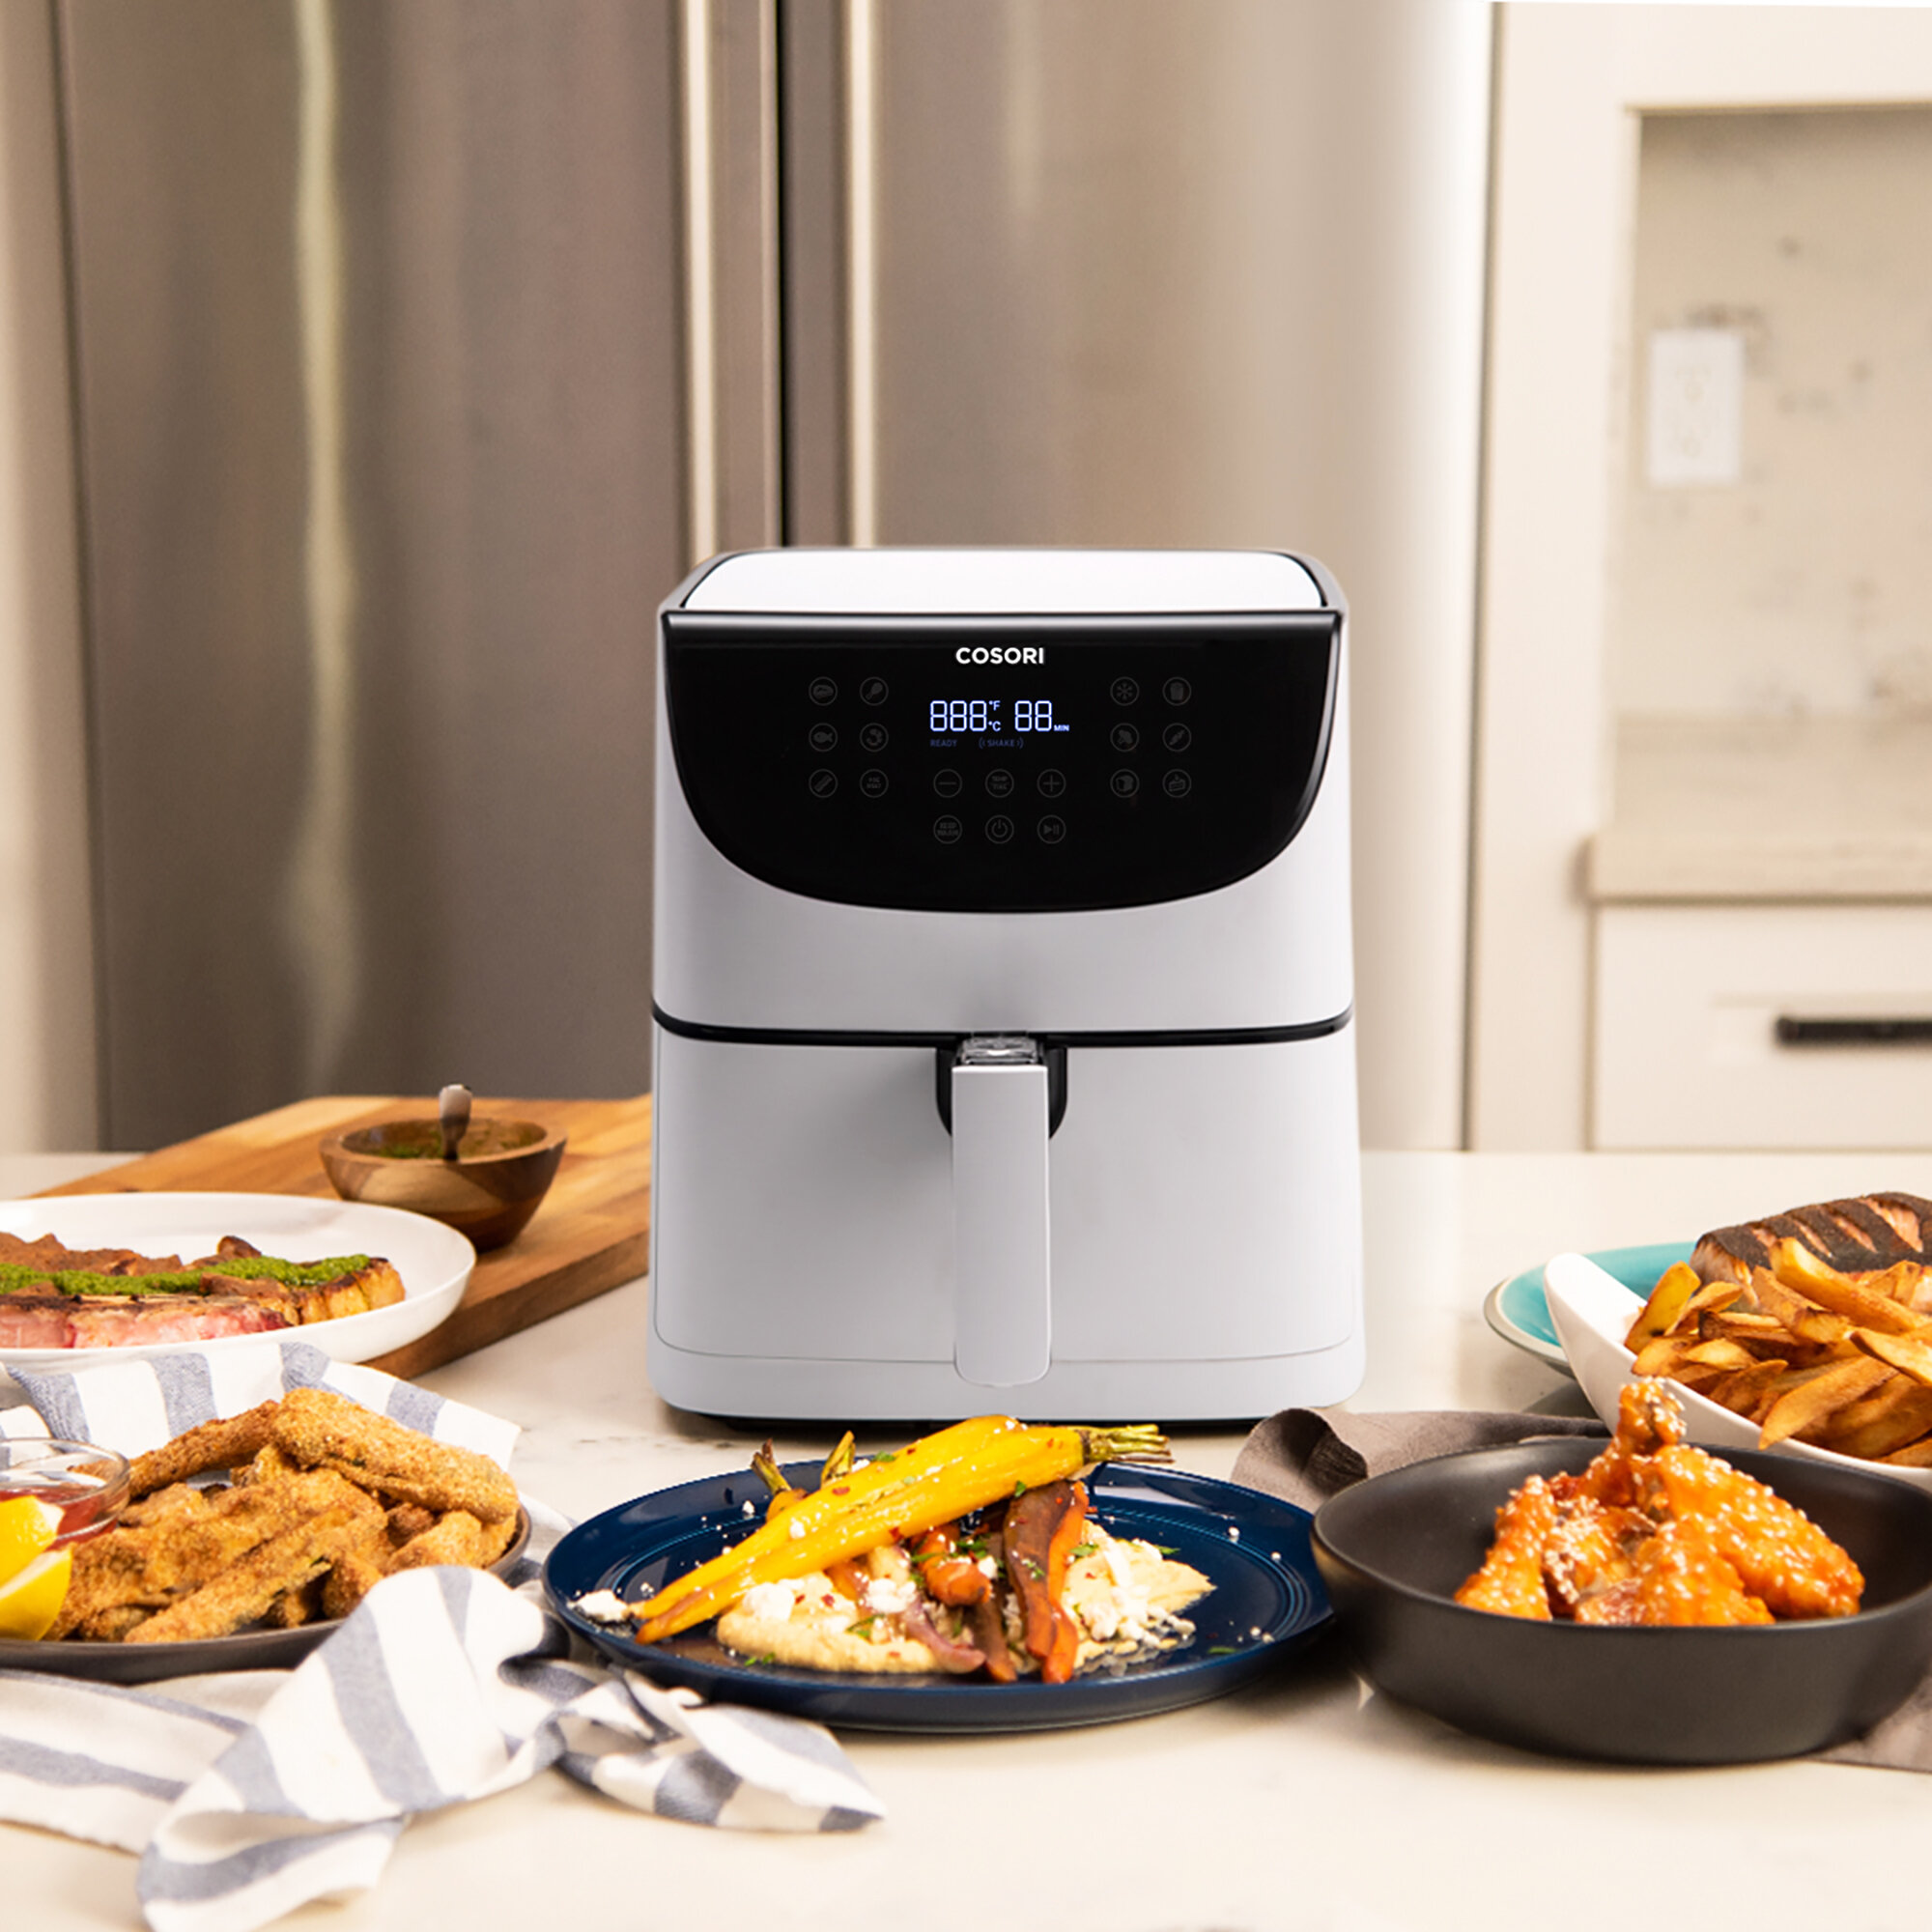 Best White Air Fryers: 7 models compared